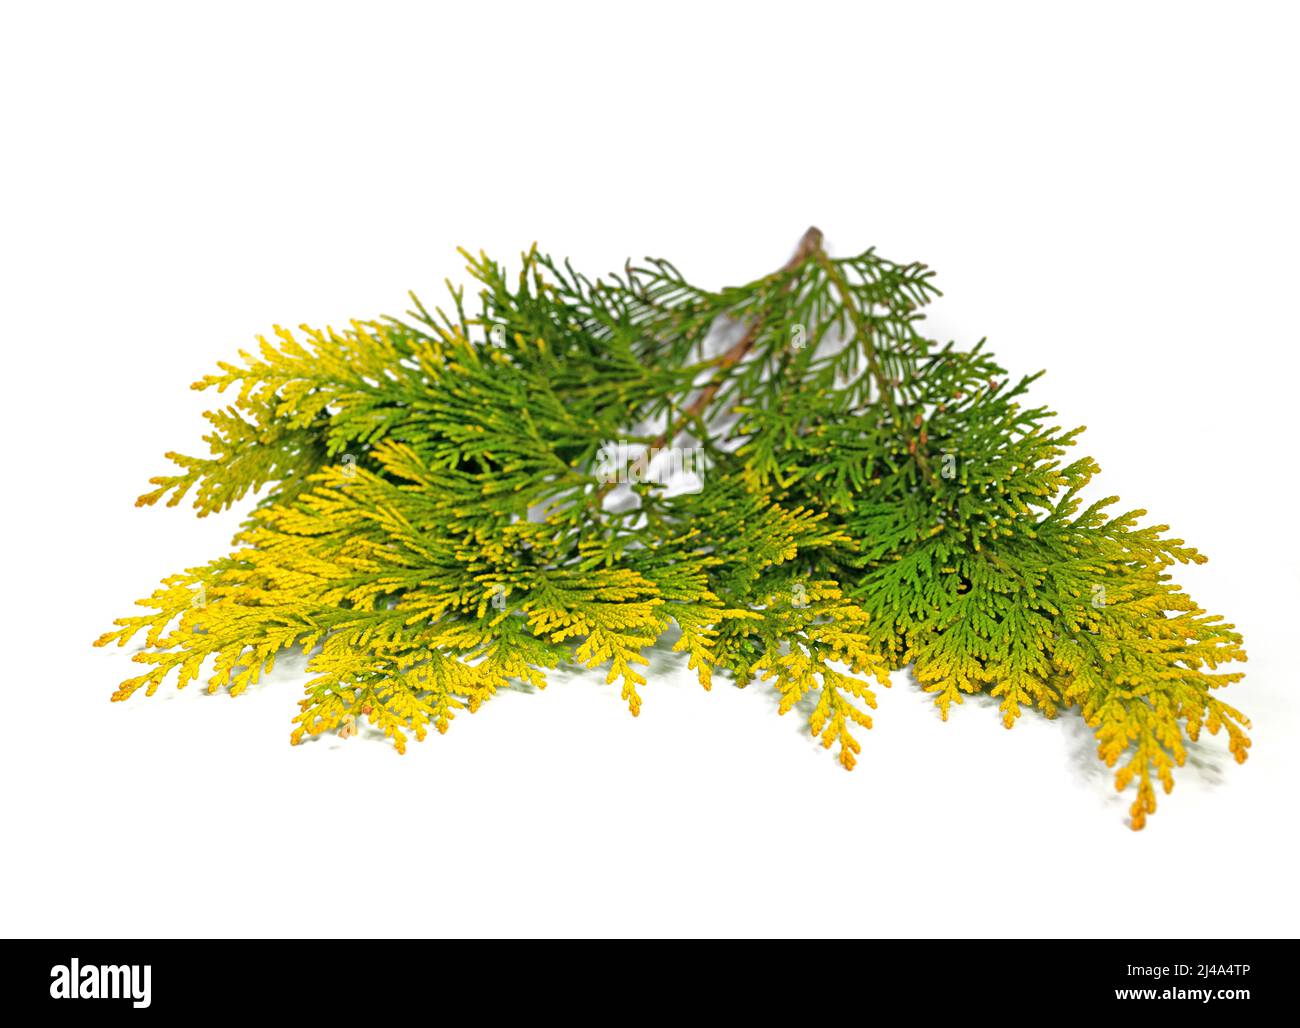 Leaves of Lawson's cypress against white background Stock Photo